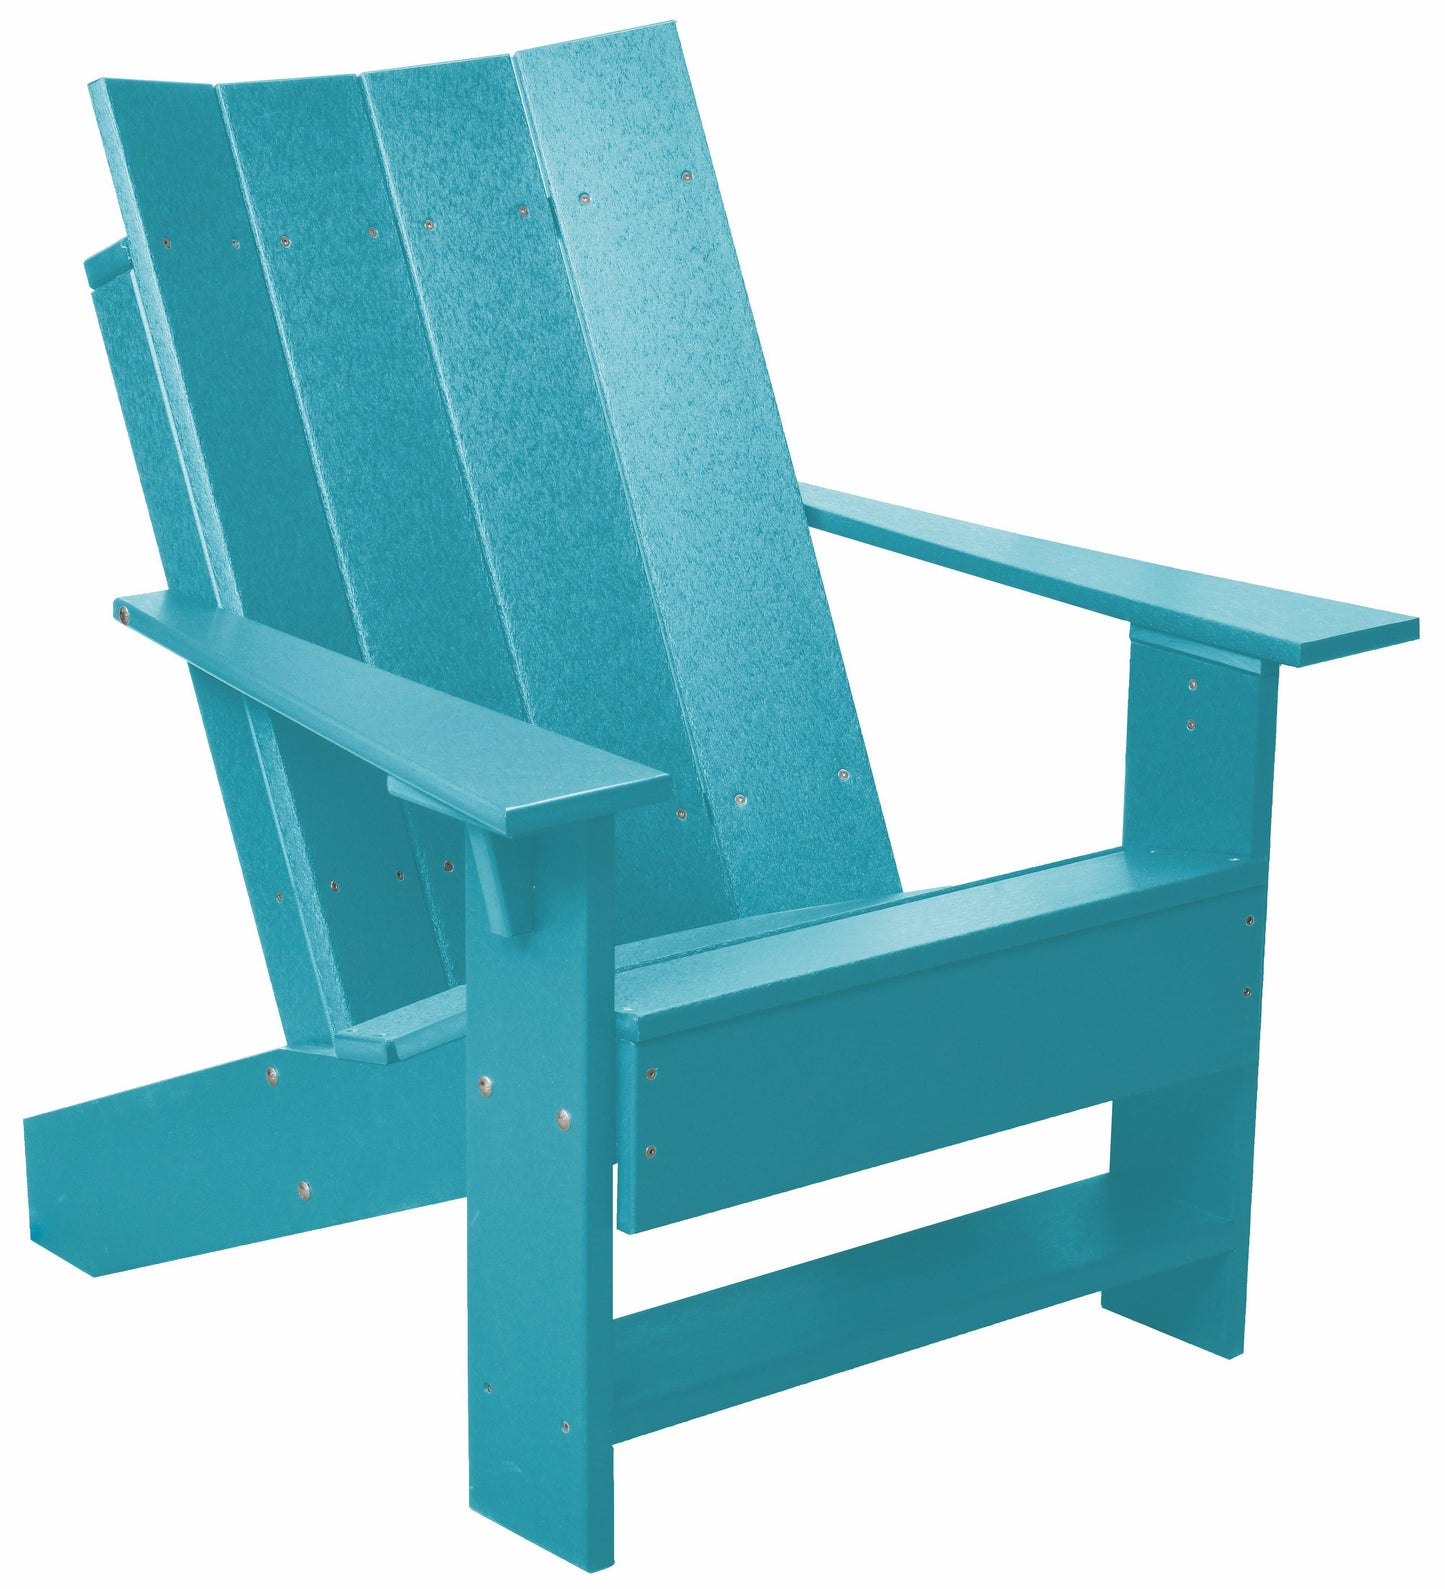 Wildridge Outdoor Recycled Plastic LCC-314 Contemporary Adirondack Chair (QUICK SHIP) - LEAD TIME TO SHIP 3 TO 4 BUSINESS DAYS